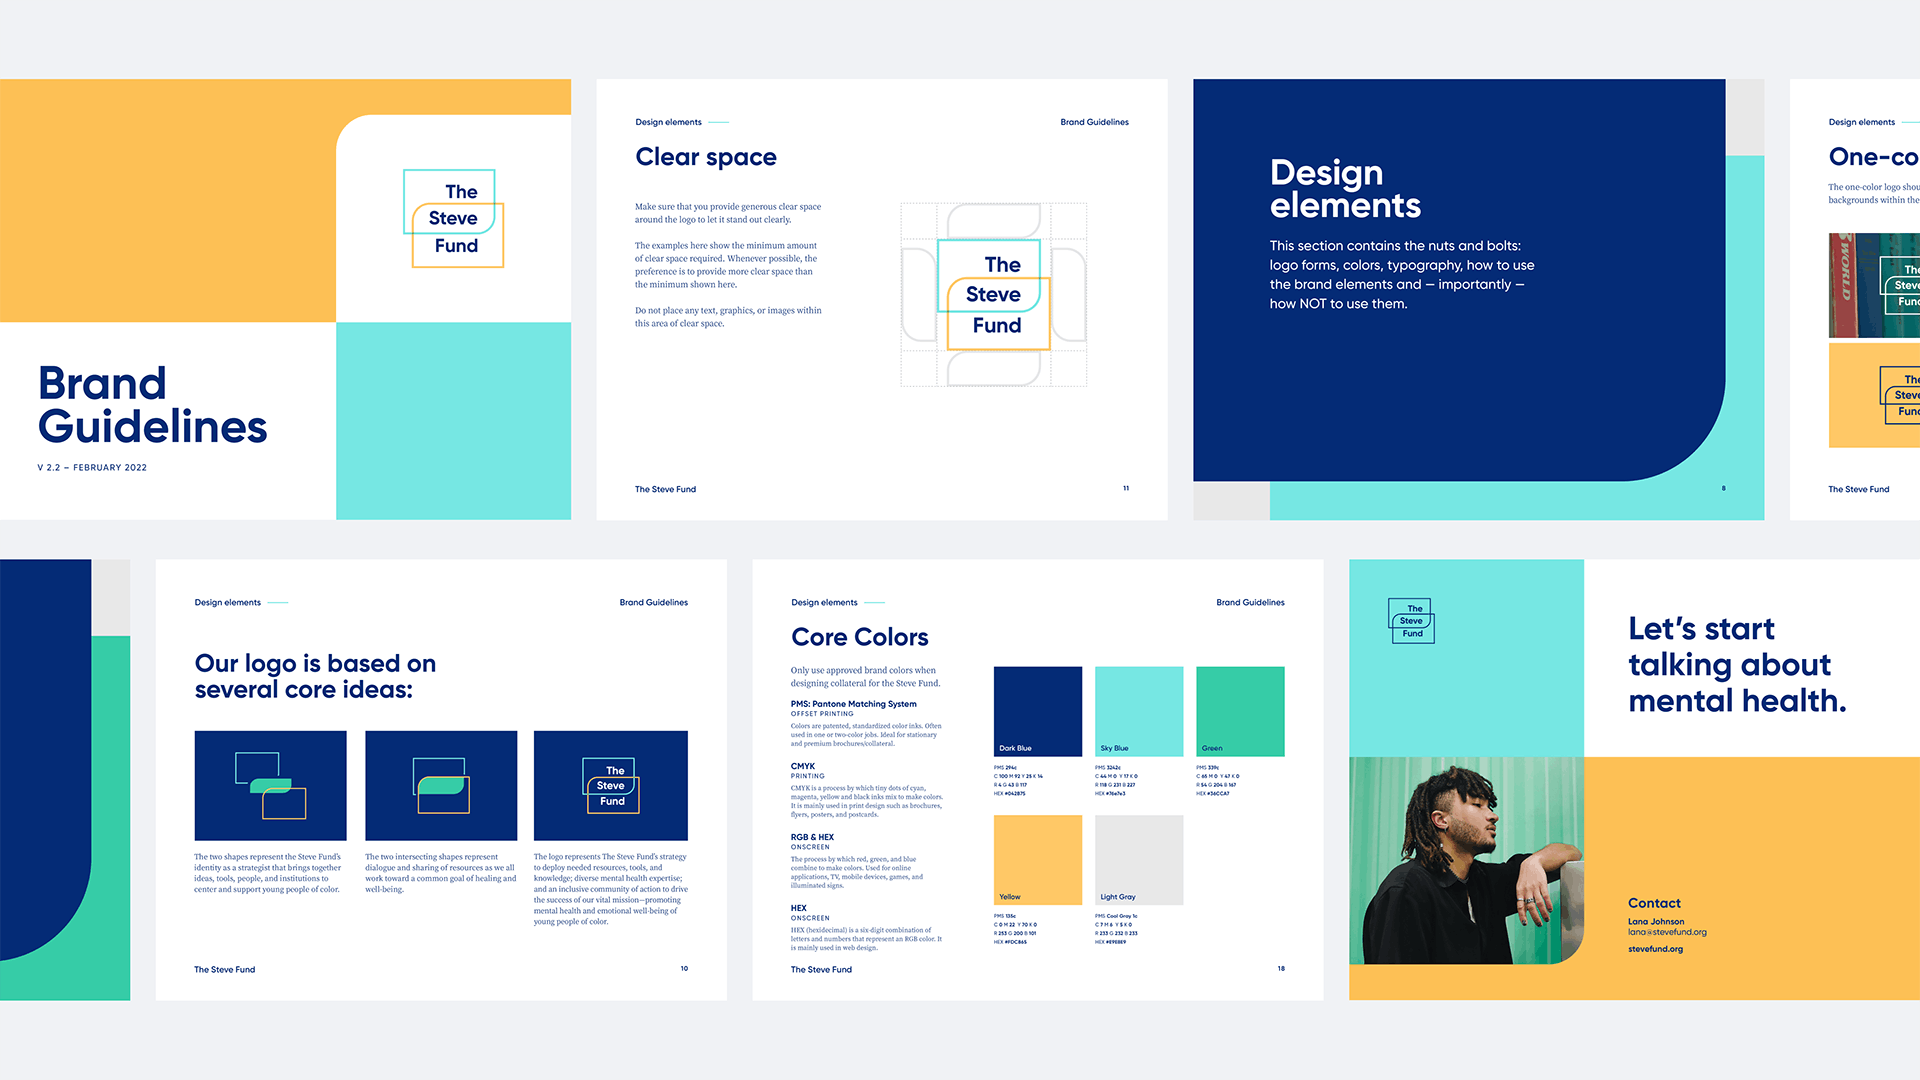 Snippets from The Steve Fund brand guidelines